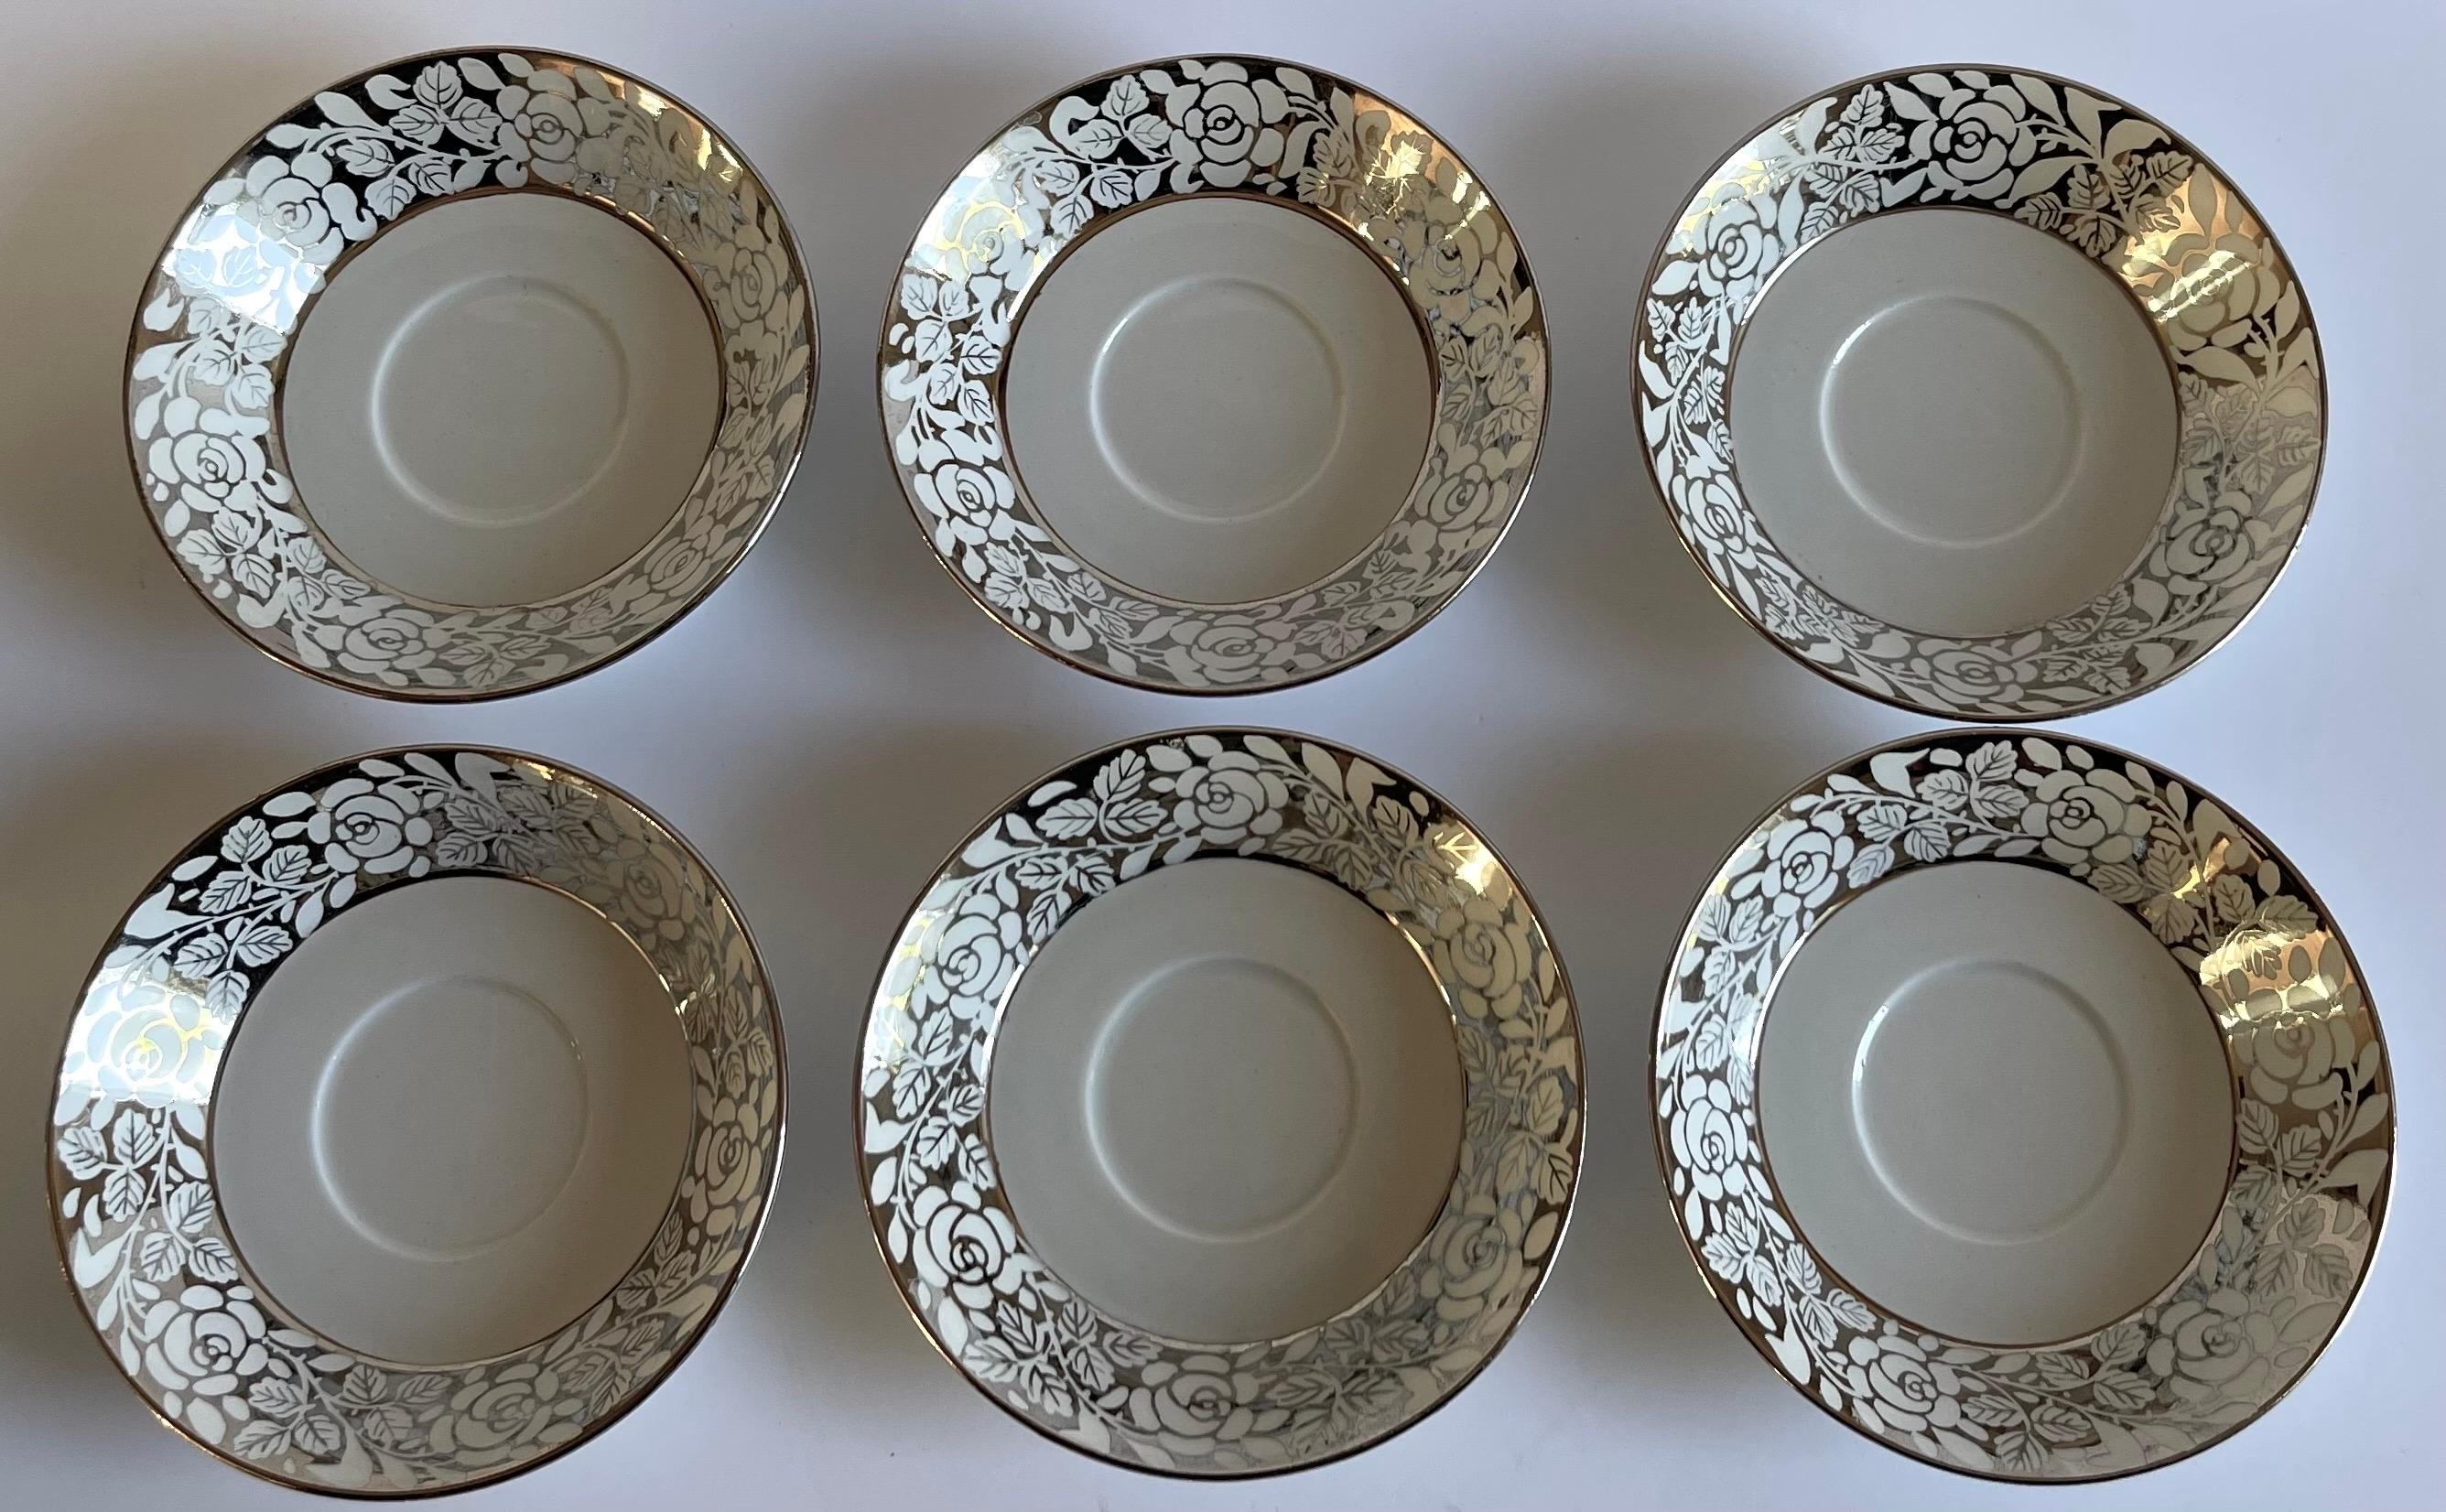 1930s Wedgwood Lustreware Tea Cups & Saucers, Set of 6 In Good Condition For Sale In Stamford, CT